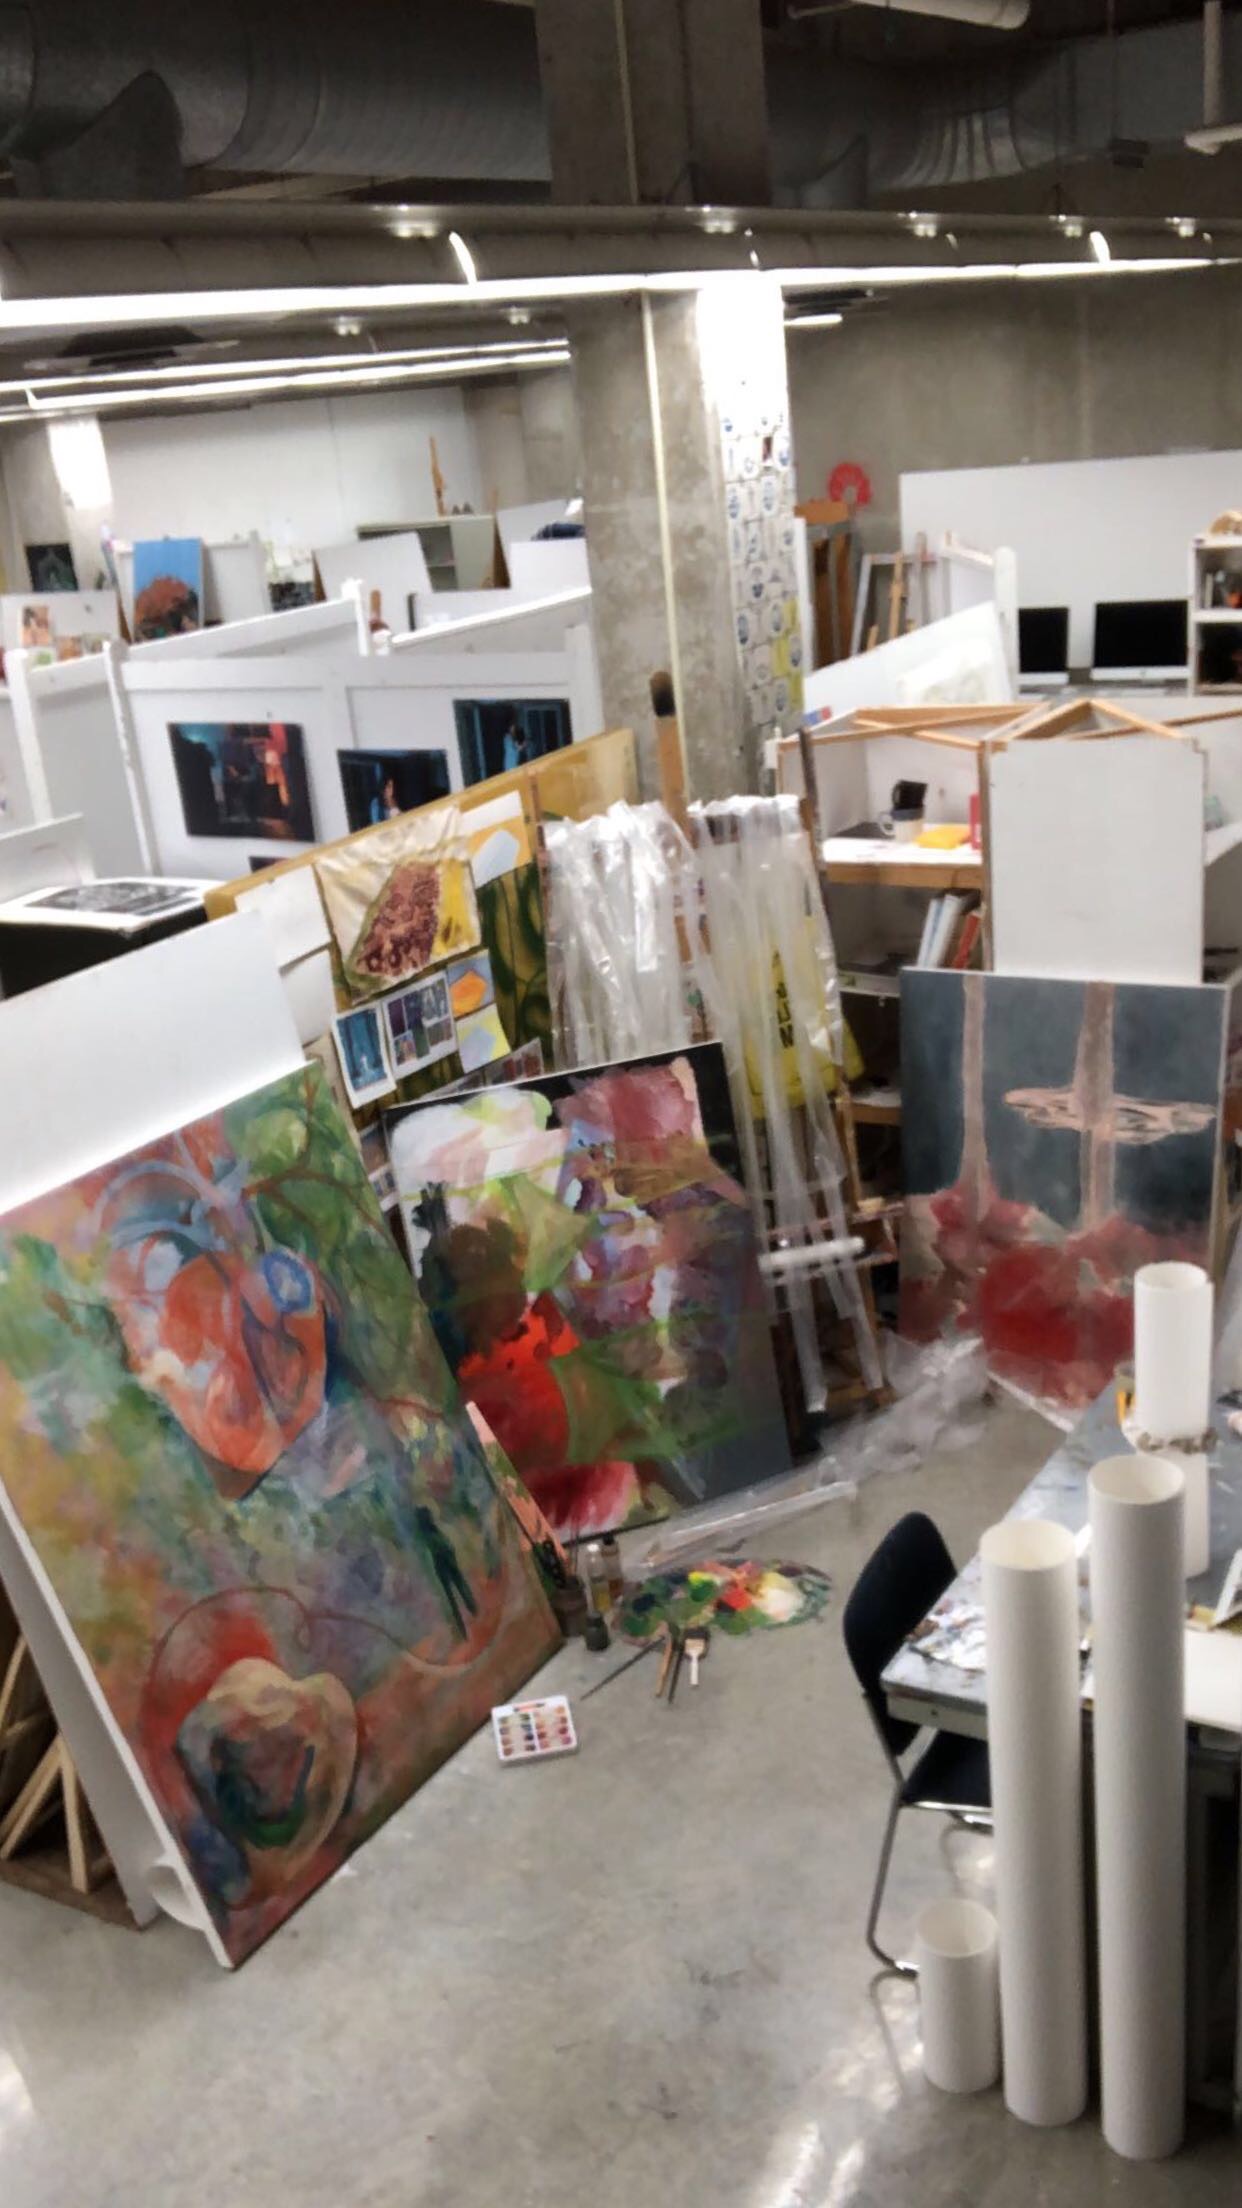 Overhead photo of a studio space containing canvases being worked on.